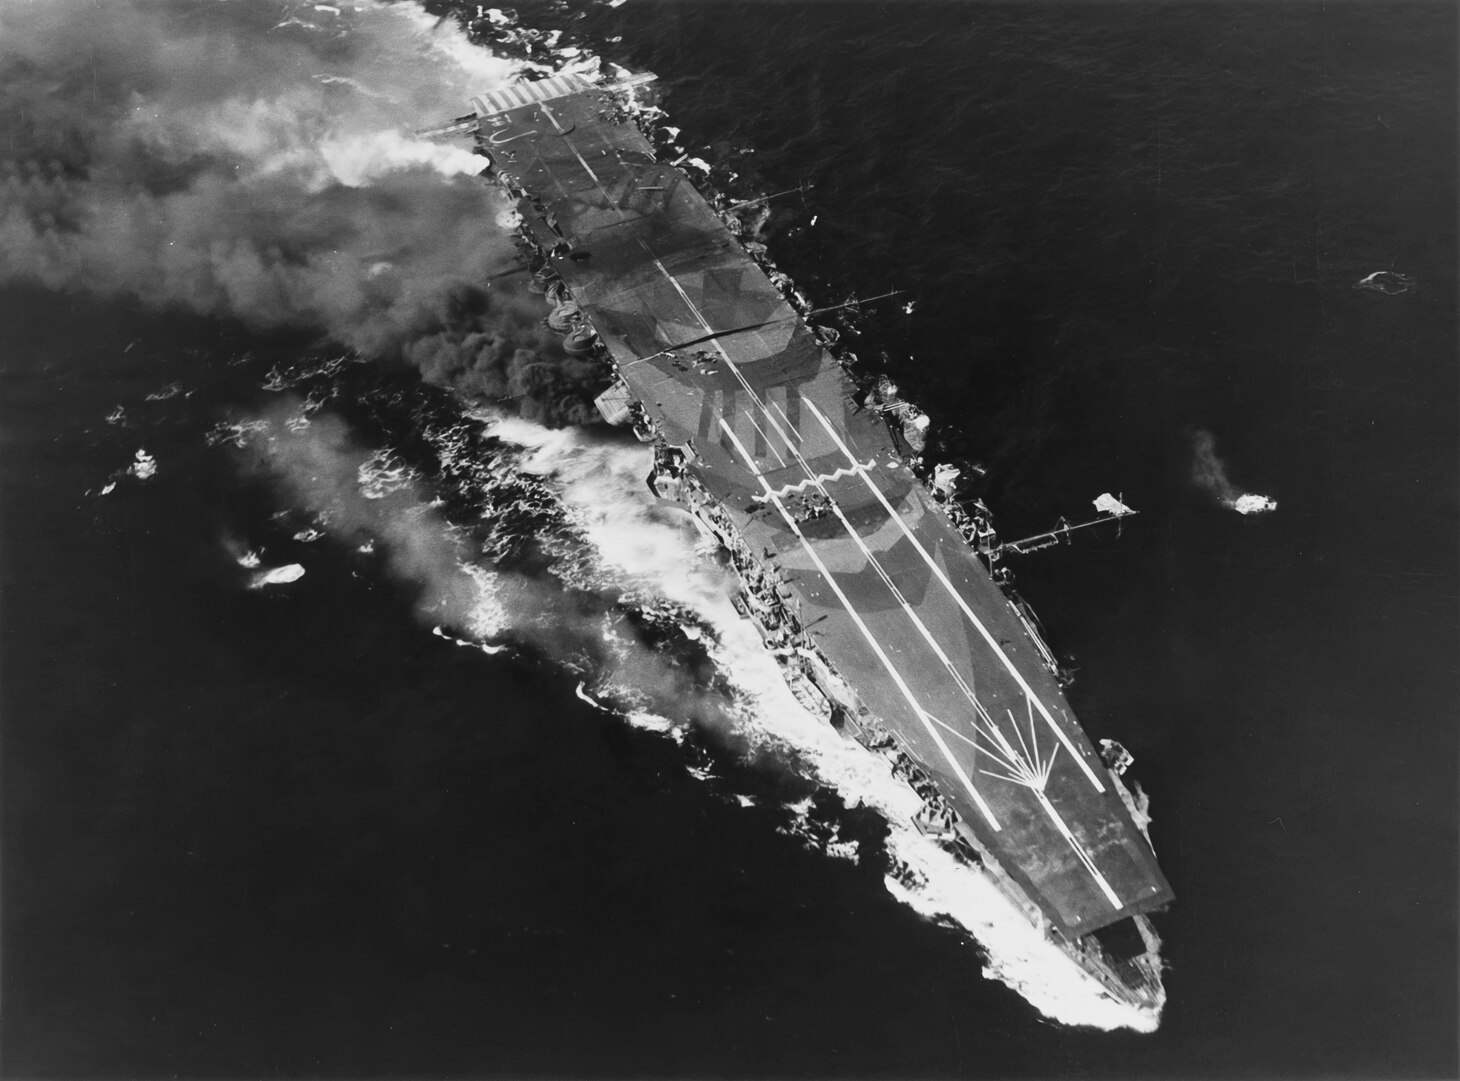 Battle of Leyte Gulf, October 1944. Japanese aircraft carrier ZUIHO still underway after several hits by planes from task force 38 during the battle off Cape Engano, 25 October 1944. Photographed from a USS ENTERPRISE (CV-6) aircraft. Note flight deck camouflage, men on deck, buckled flight deck amidships and mast deployed horizontally, with a Japanese Naval ensign at its tip.